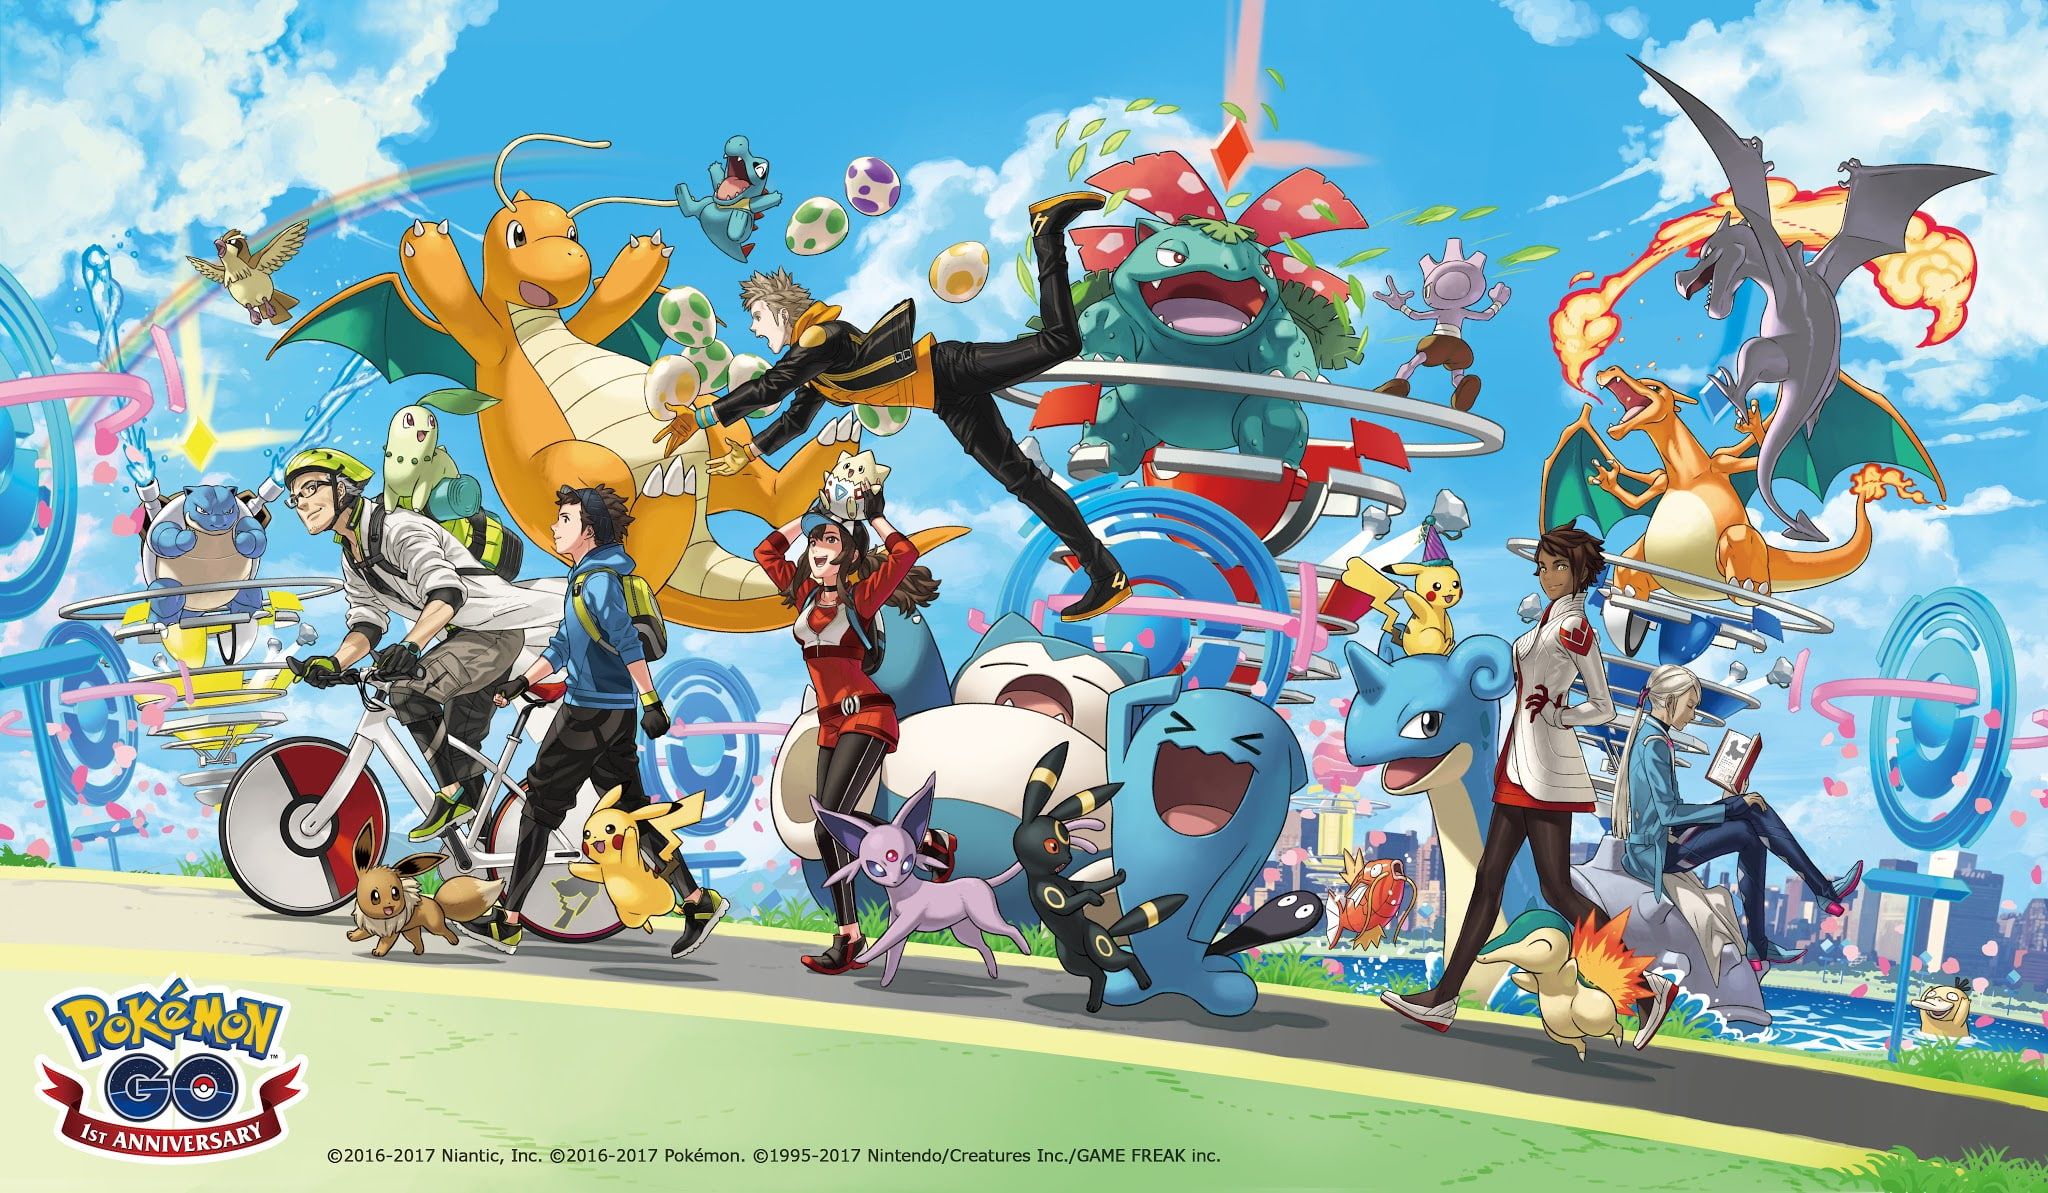 Pokemon Go characters are standing in front of an amusement park. - Pikachu